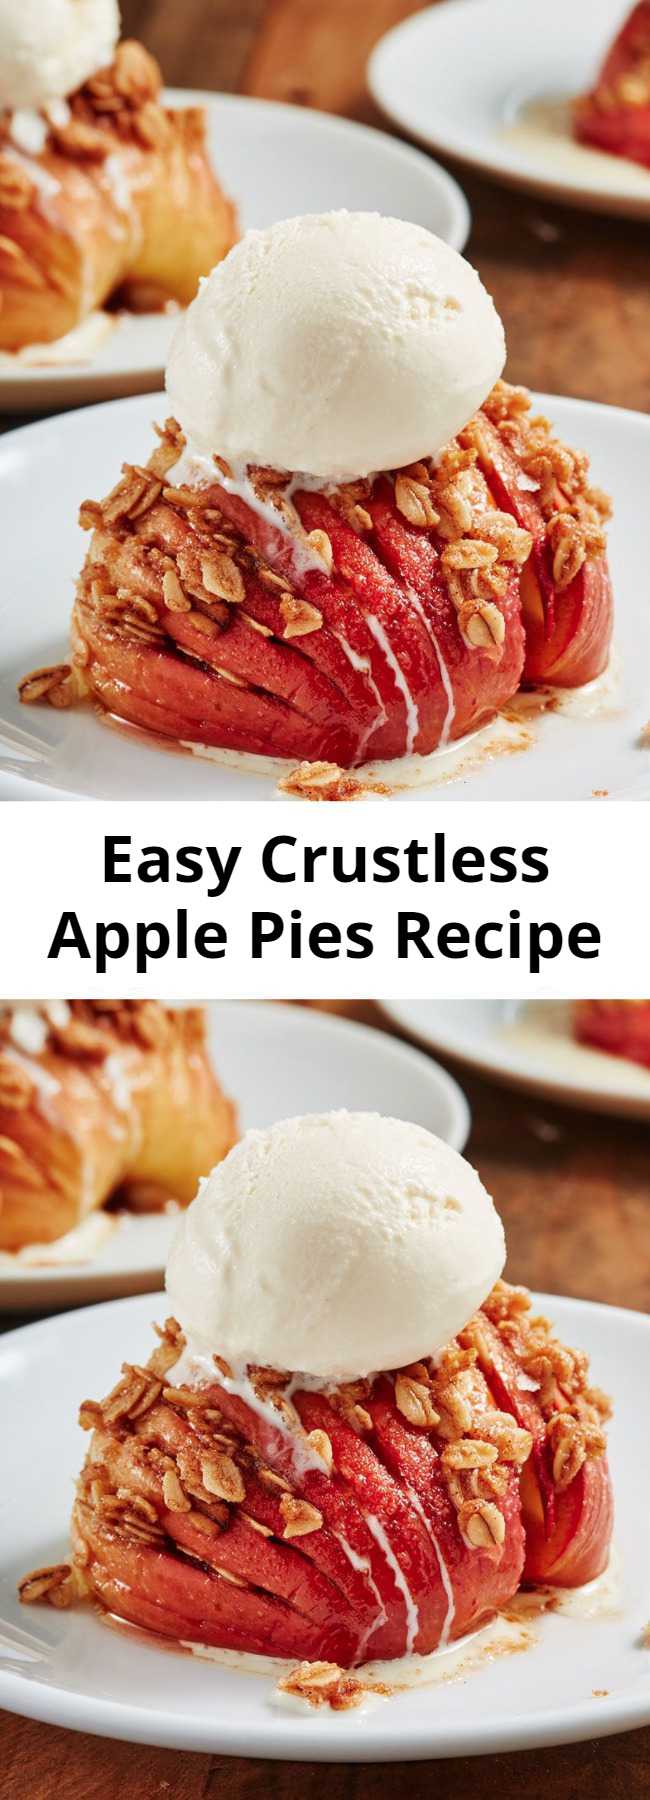 Easy Crustless Apple Pies Recipe - Hasselback apples are the easy fall dessert idea you need to try ASAP. It's a low-carb recipe that doesn't taste like it. The best part: You don't need to deal with rolling out and chilling pie dough. #easyrecipes #easydessert #healthydessert #lowcarbdessert #applerecipes #dessert #applepie #healthyapple